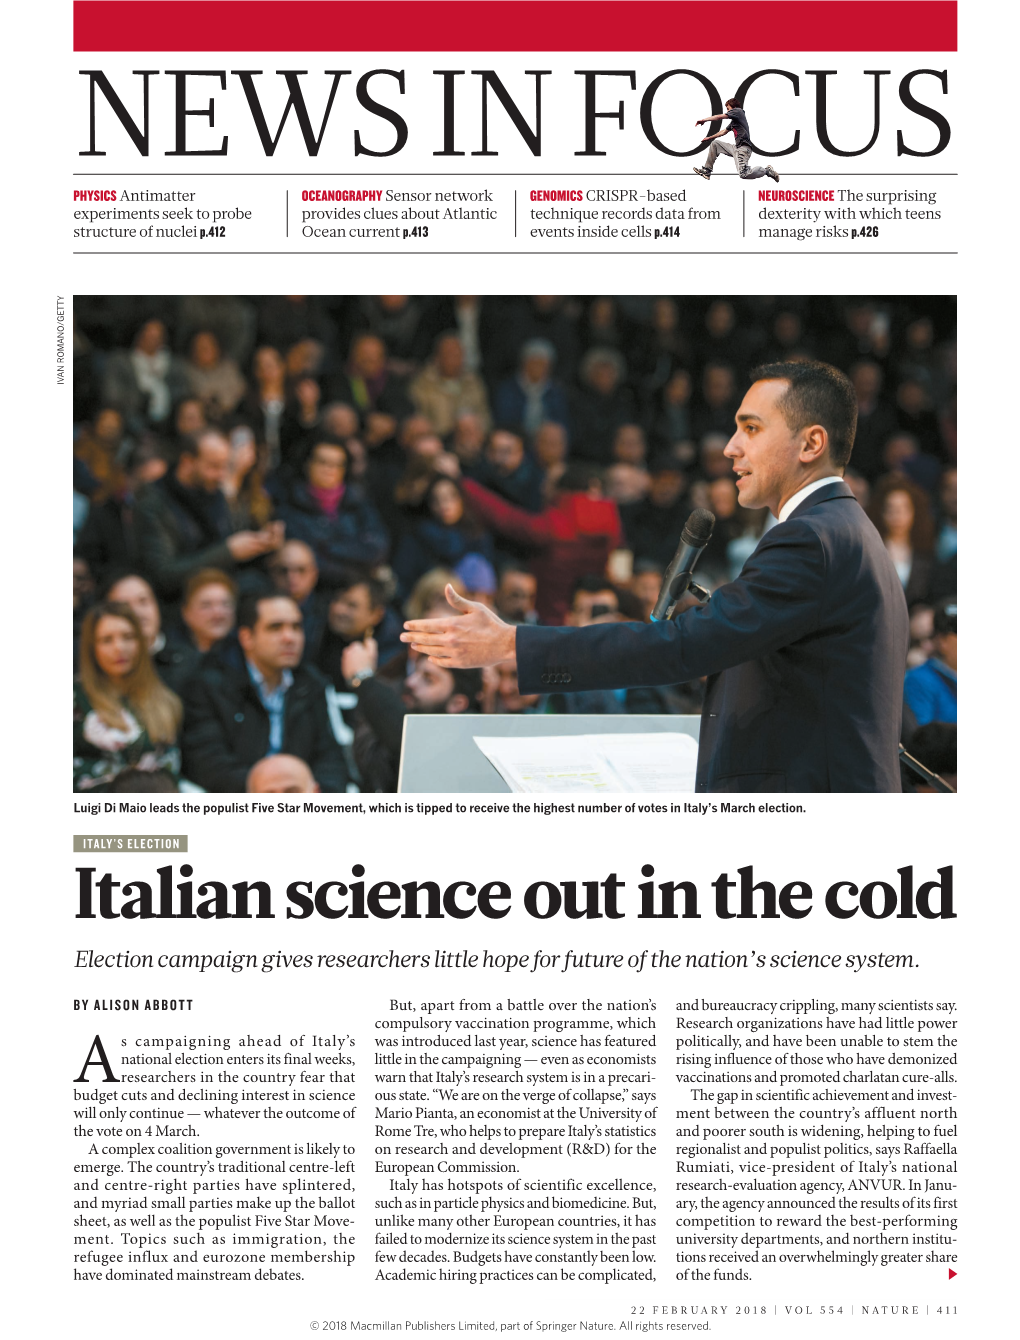 Italian Science out in the Cold Election Campaign Gives Researchers Little Hope for Future of the Nation’S Science System